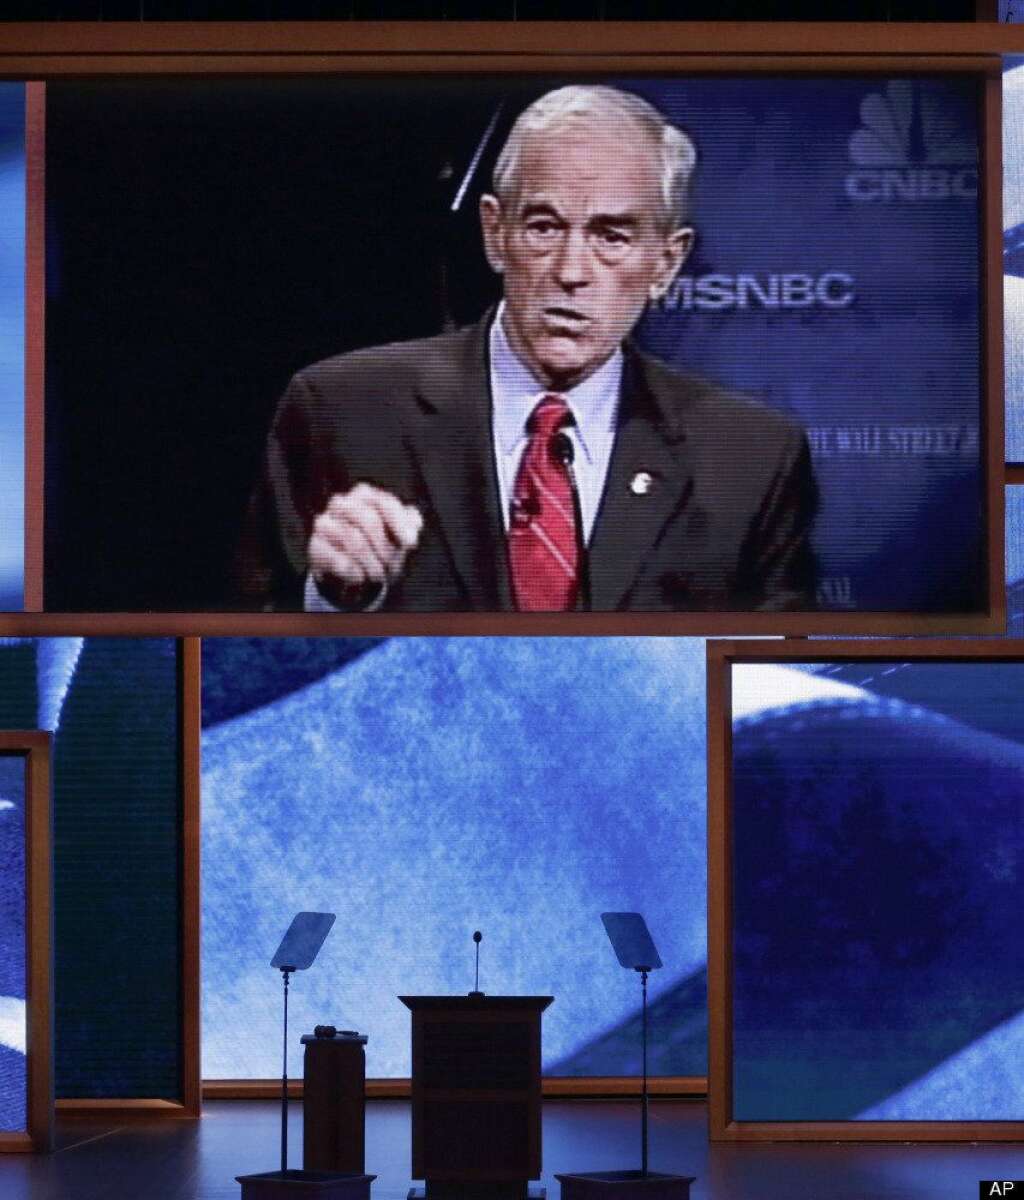 A video honoring of Rep. Ron Paul, R-Texas, is displayed during the Republican National Convention in Tampa, Fla., on Wednesday, Aug. 29, 2012. (AP Photo/J. Scott Applewhite)